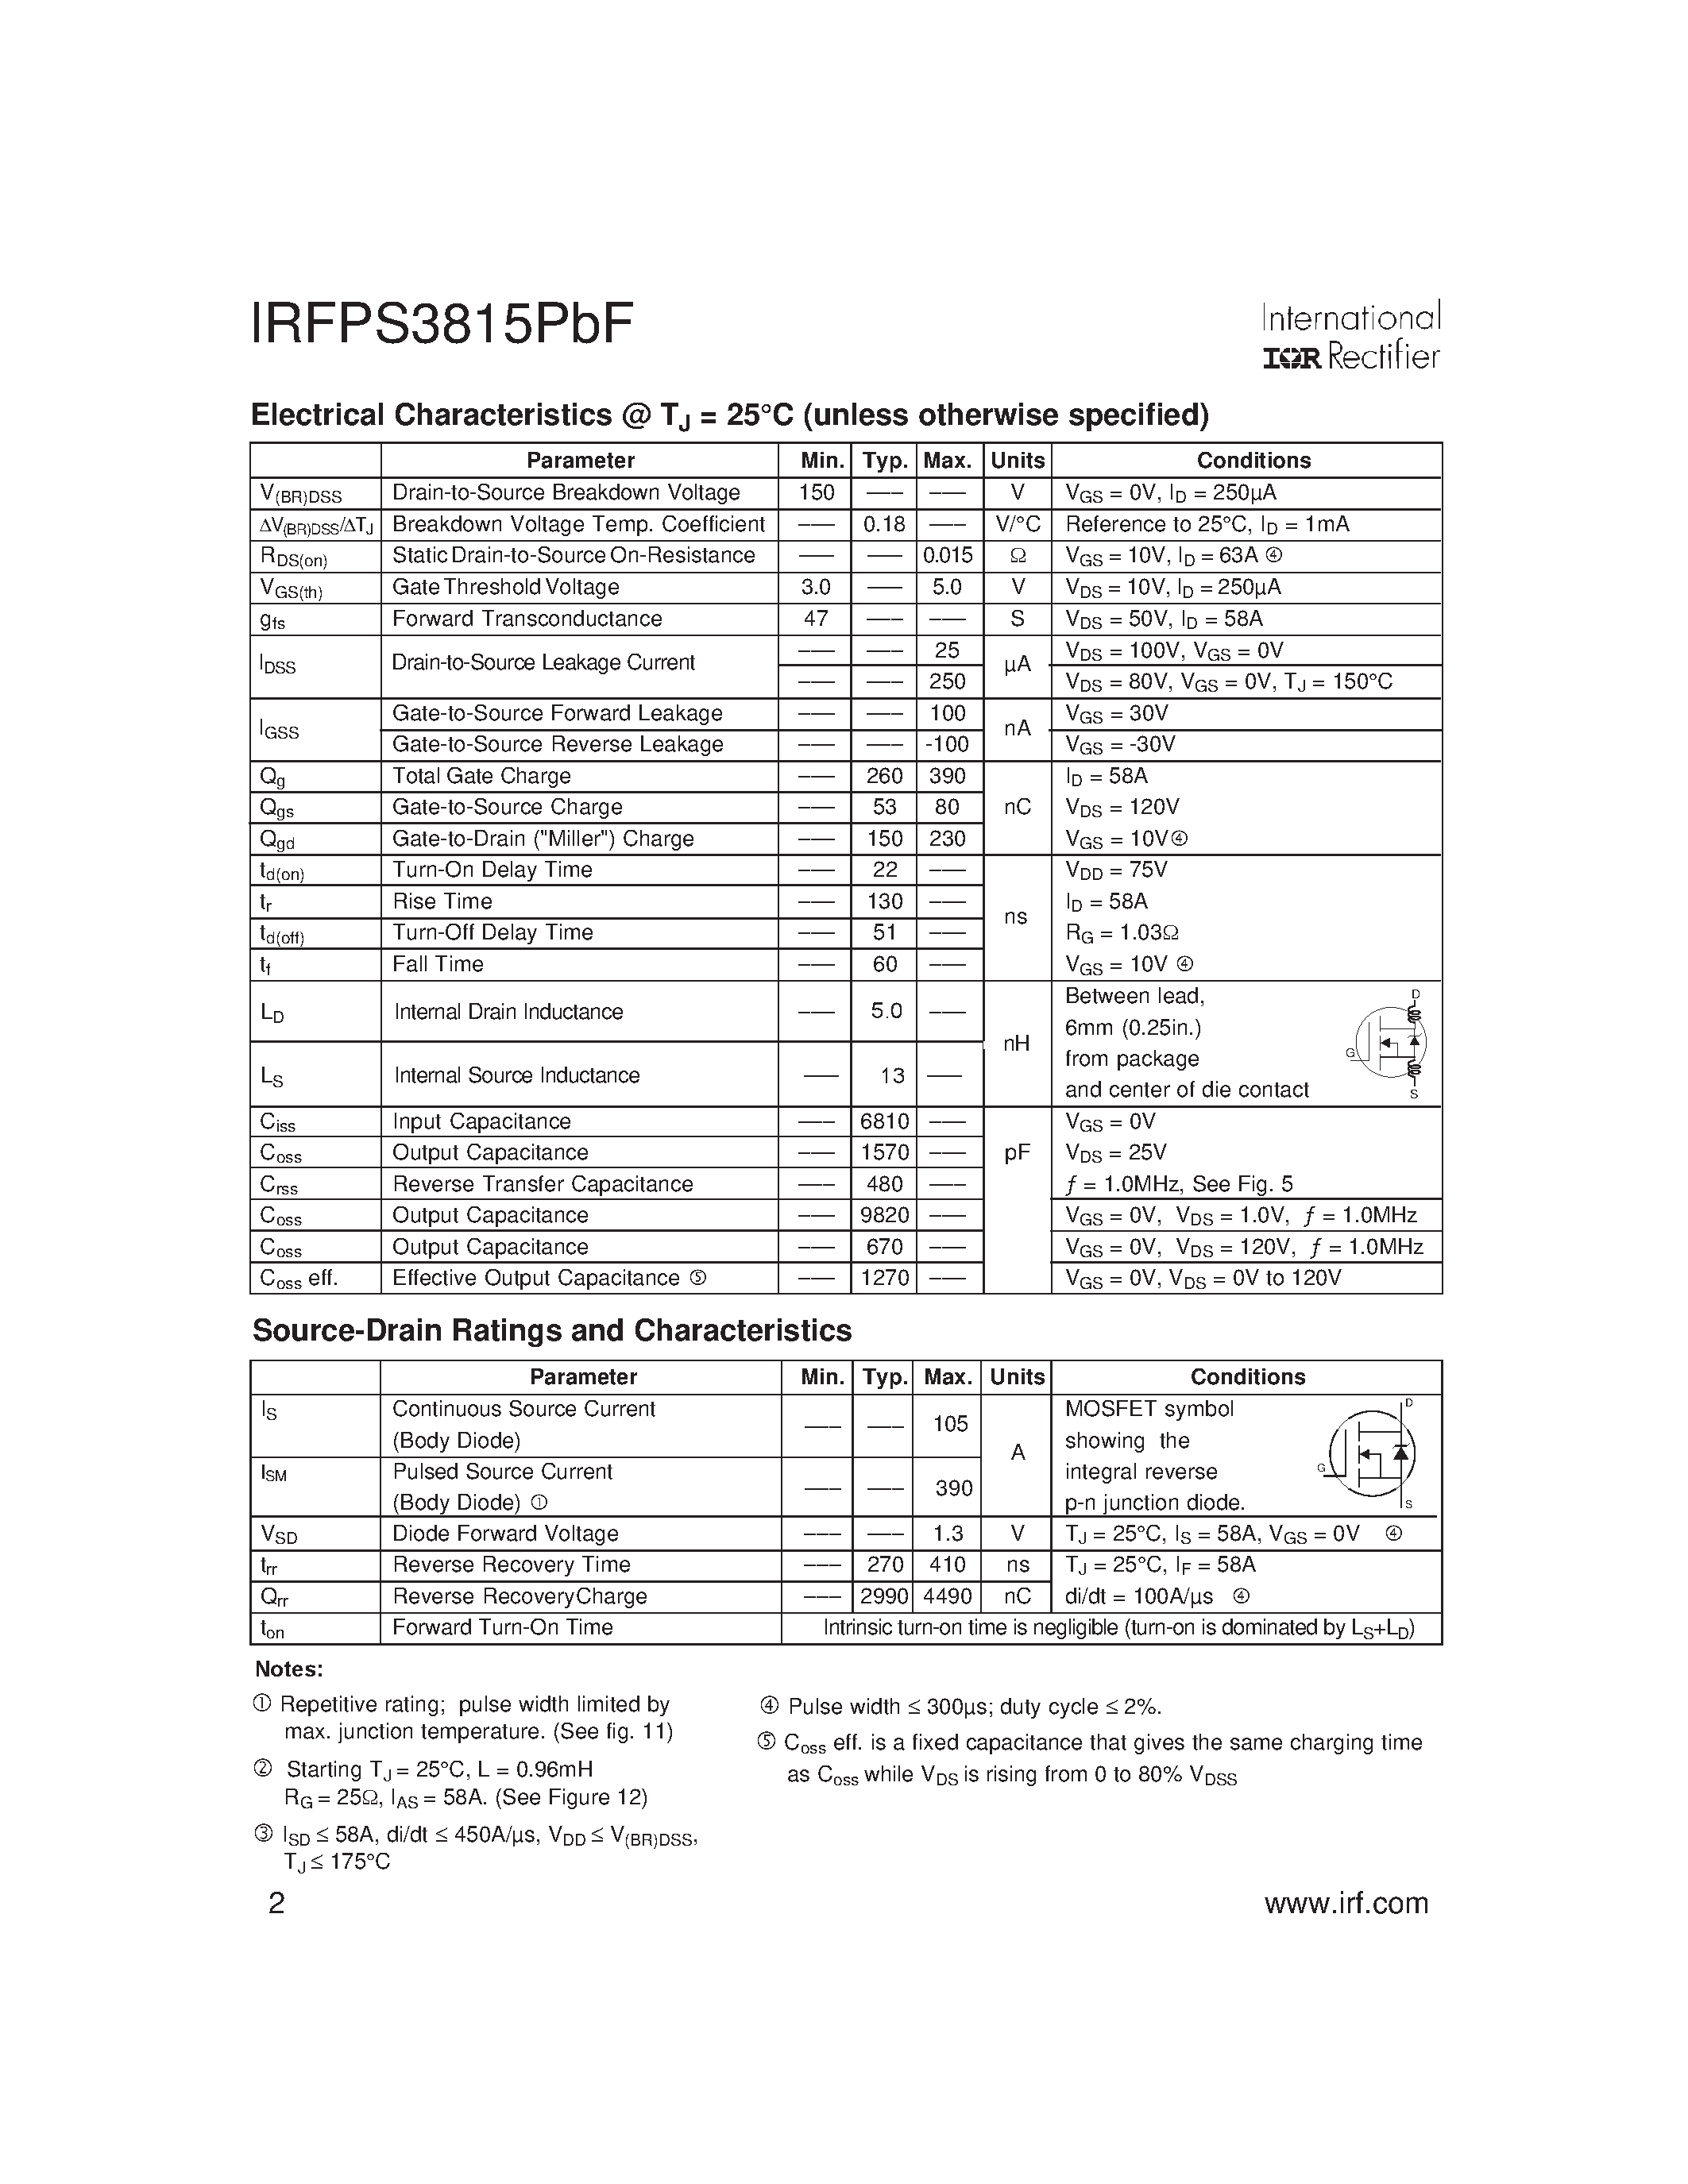 Datasheet IRFPS3815PBF - HEXFET Power MOSFET page 2